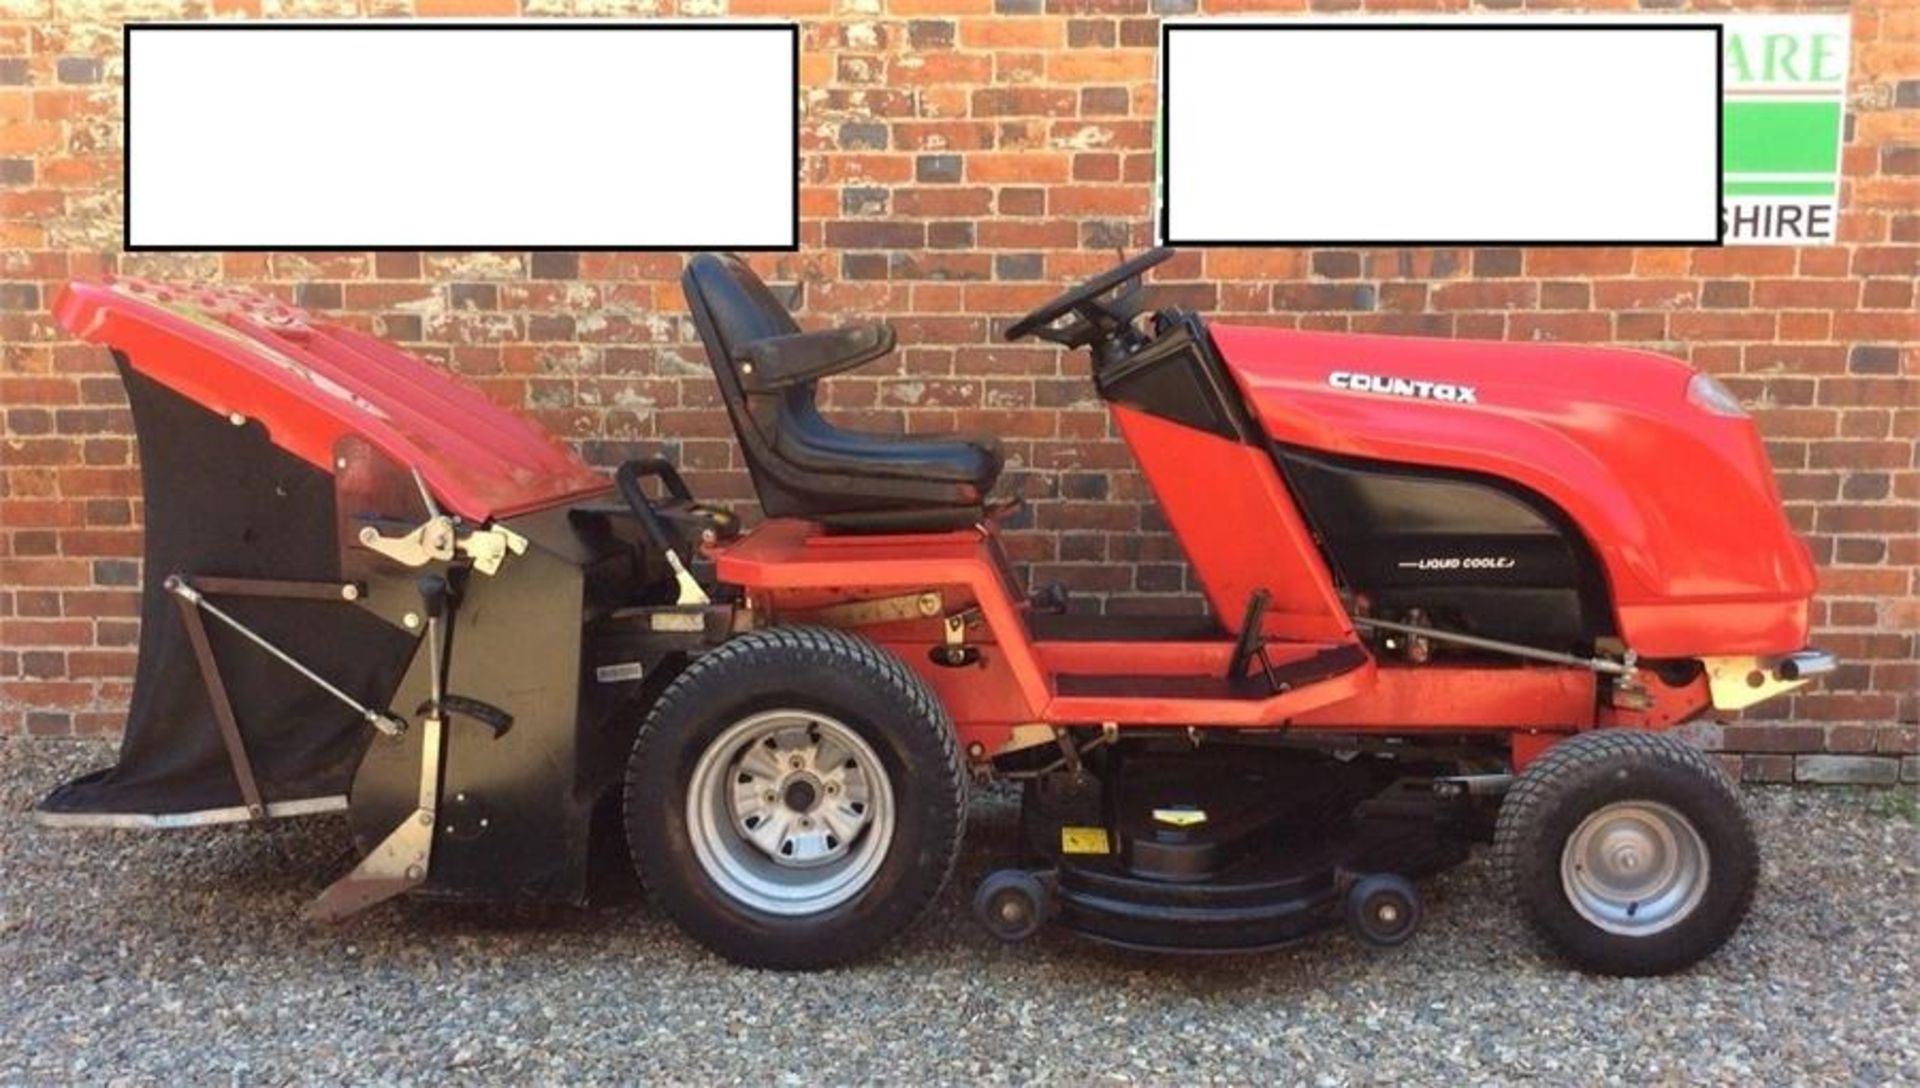 Countax K18-50 Ride On Mower sit on lawn